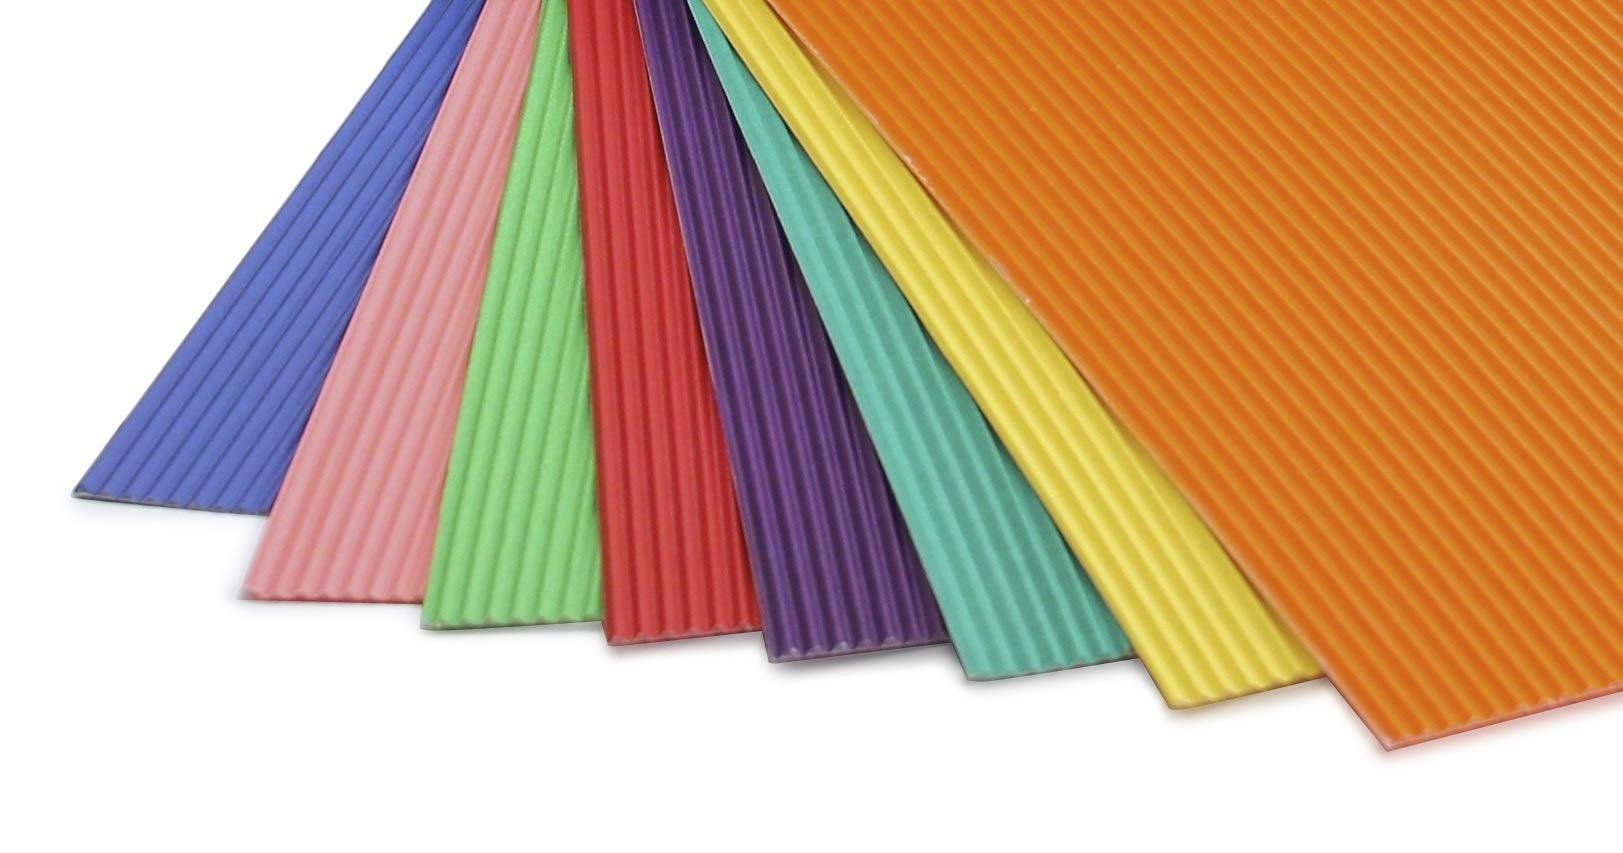 Hygloss Products Corrugated Cardboard in Assorted Colors - 8.5” x 11” Inches Corrugated Bright Sheets - 8 Sheets per Pack